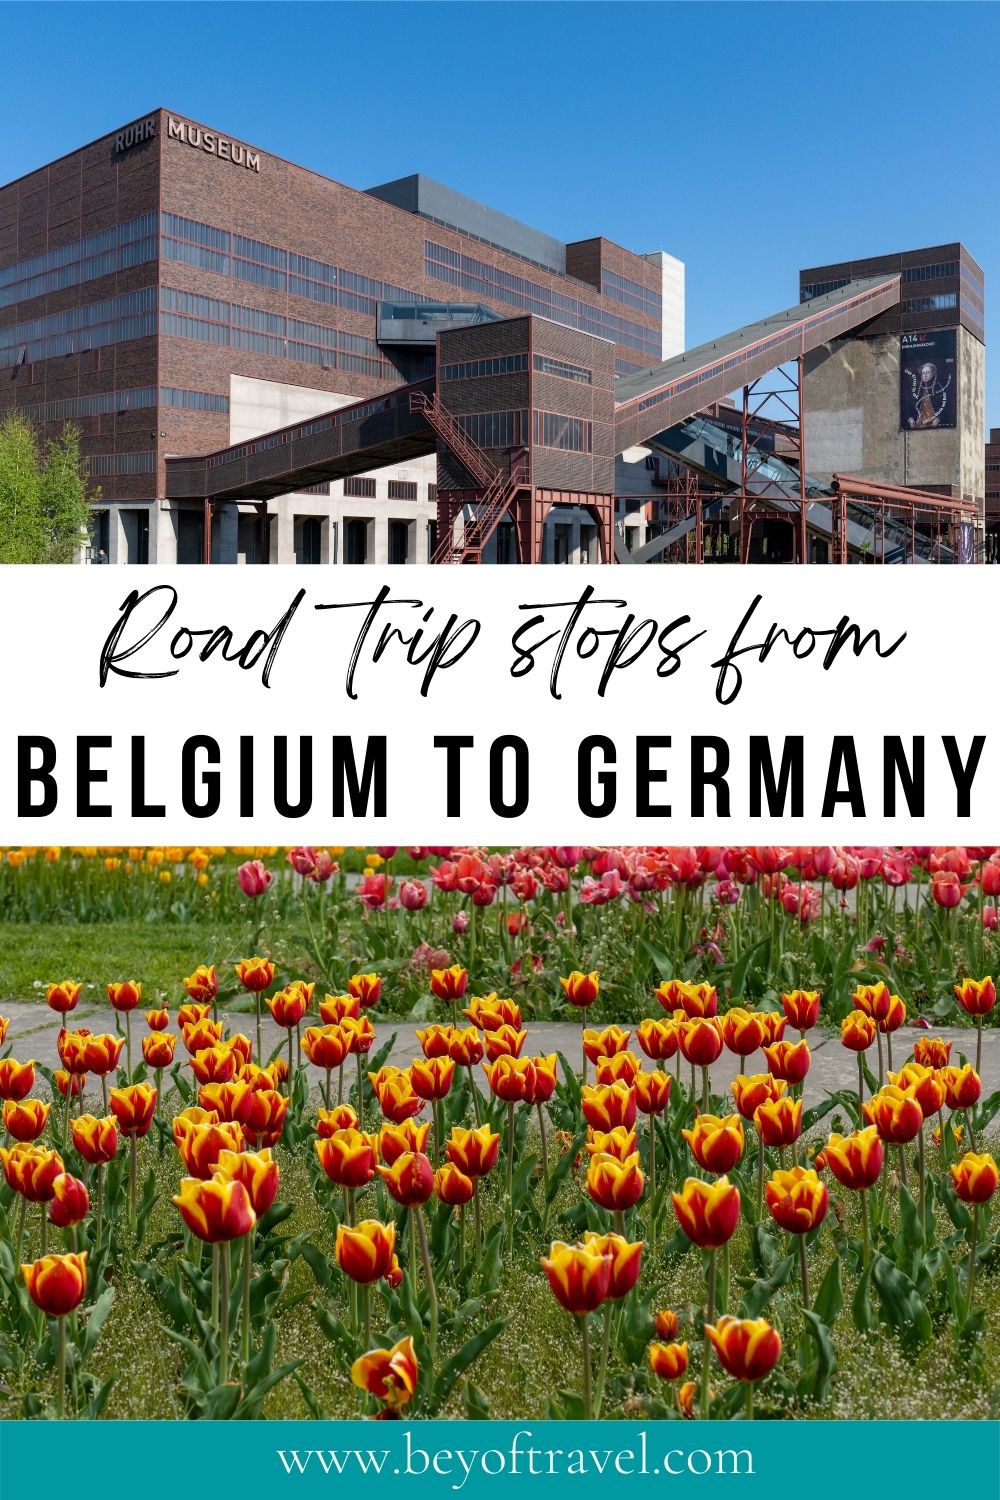 Road trip from Belgium to Germany